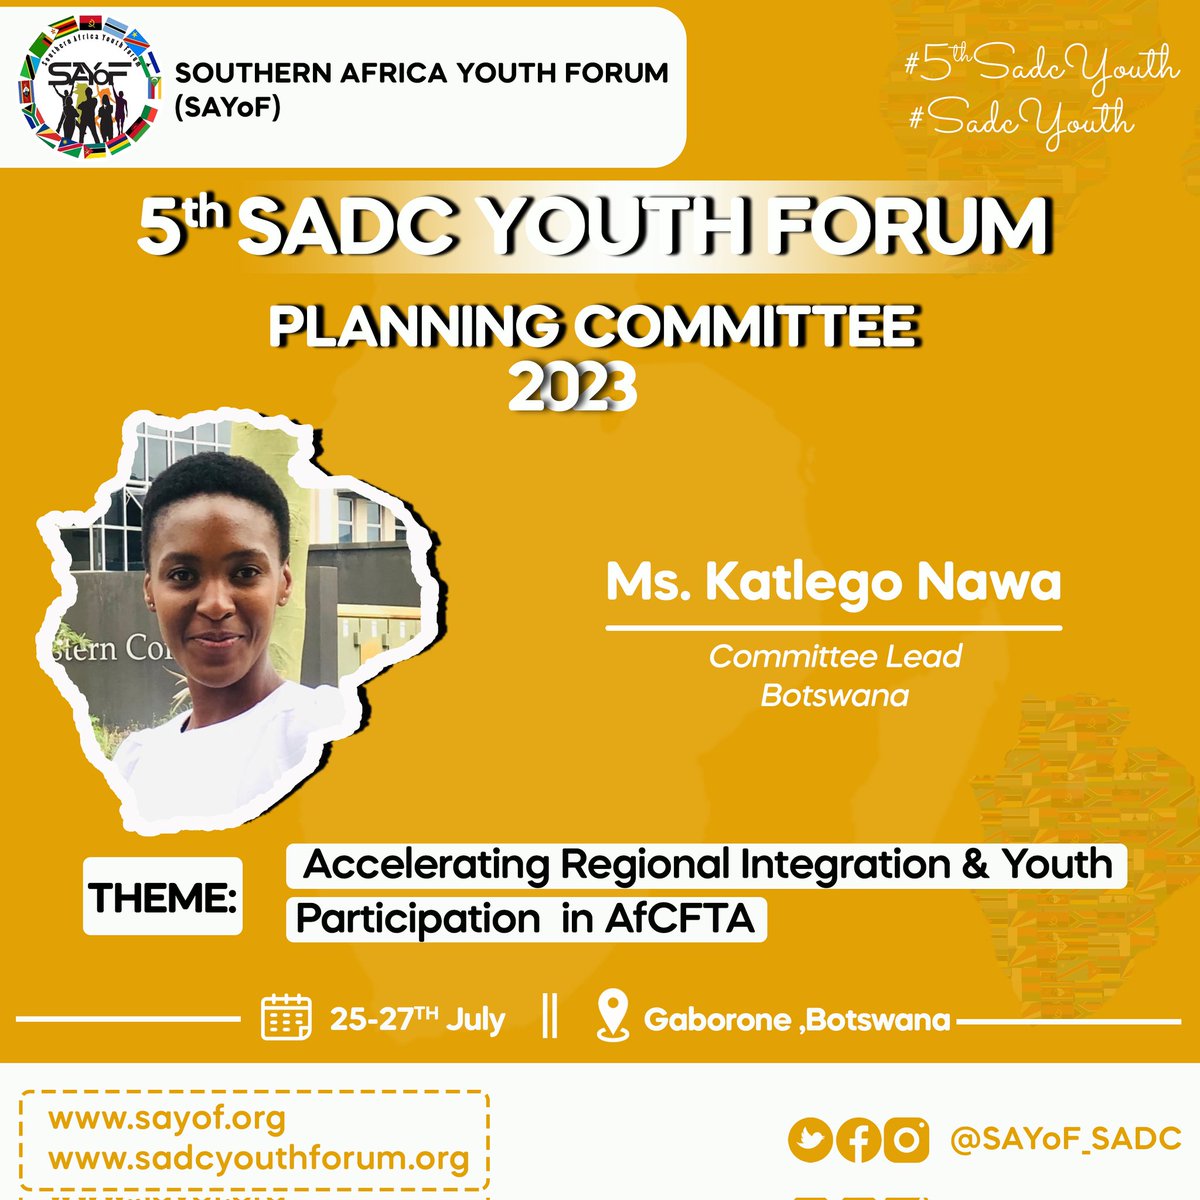 📢 Exciting news! Ms. @KatlegoNawa takes the lead as the #5thSADCYouthForum Planning Committee unveils the theme 'Accelerating Regional Integration and Youth Participation in AFCFTA'.Get ready for a dynamic forum that ignites progress and empowers youth voices!🎉🔥#SADCYouth